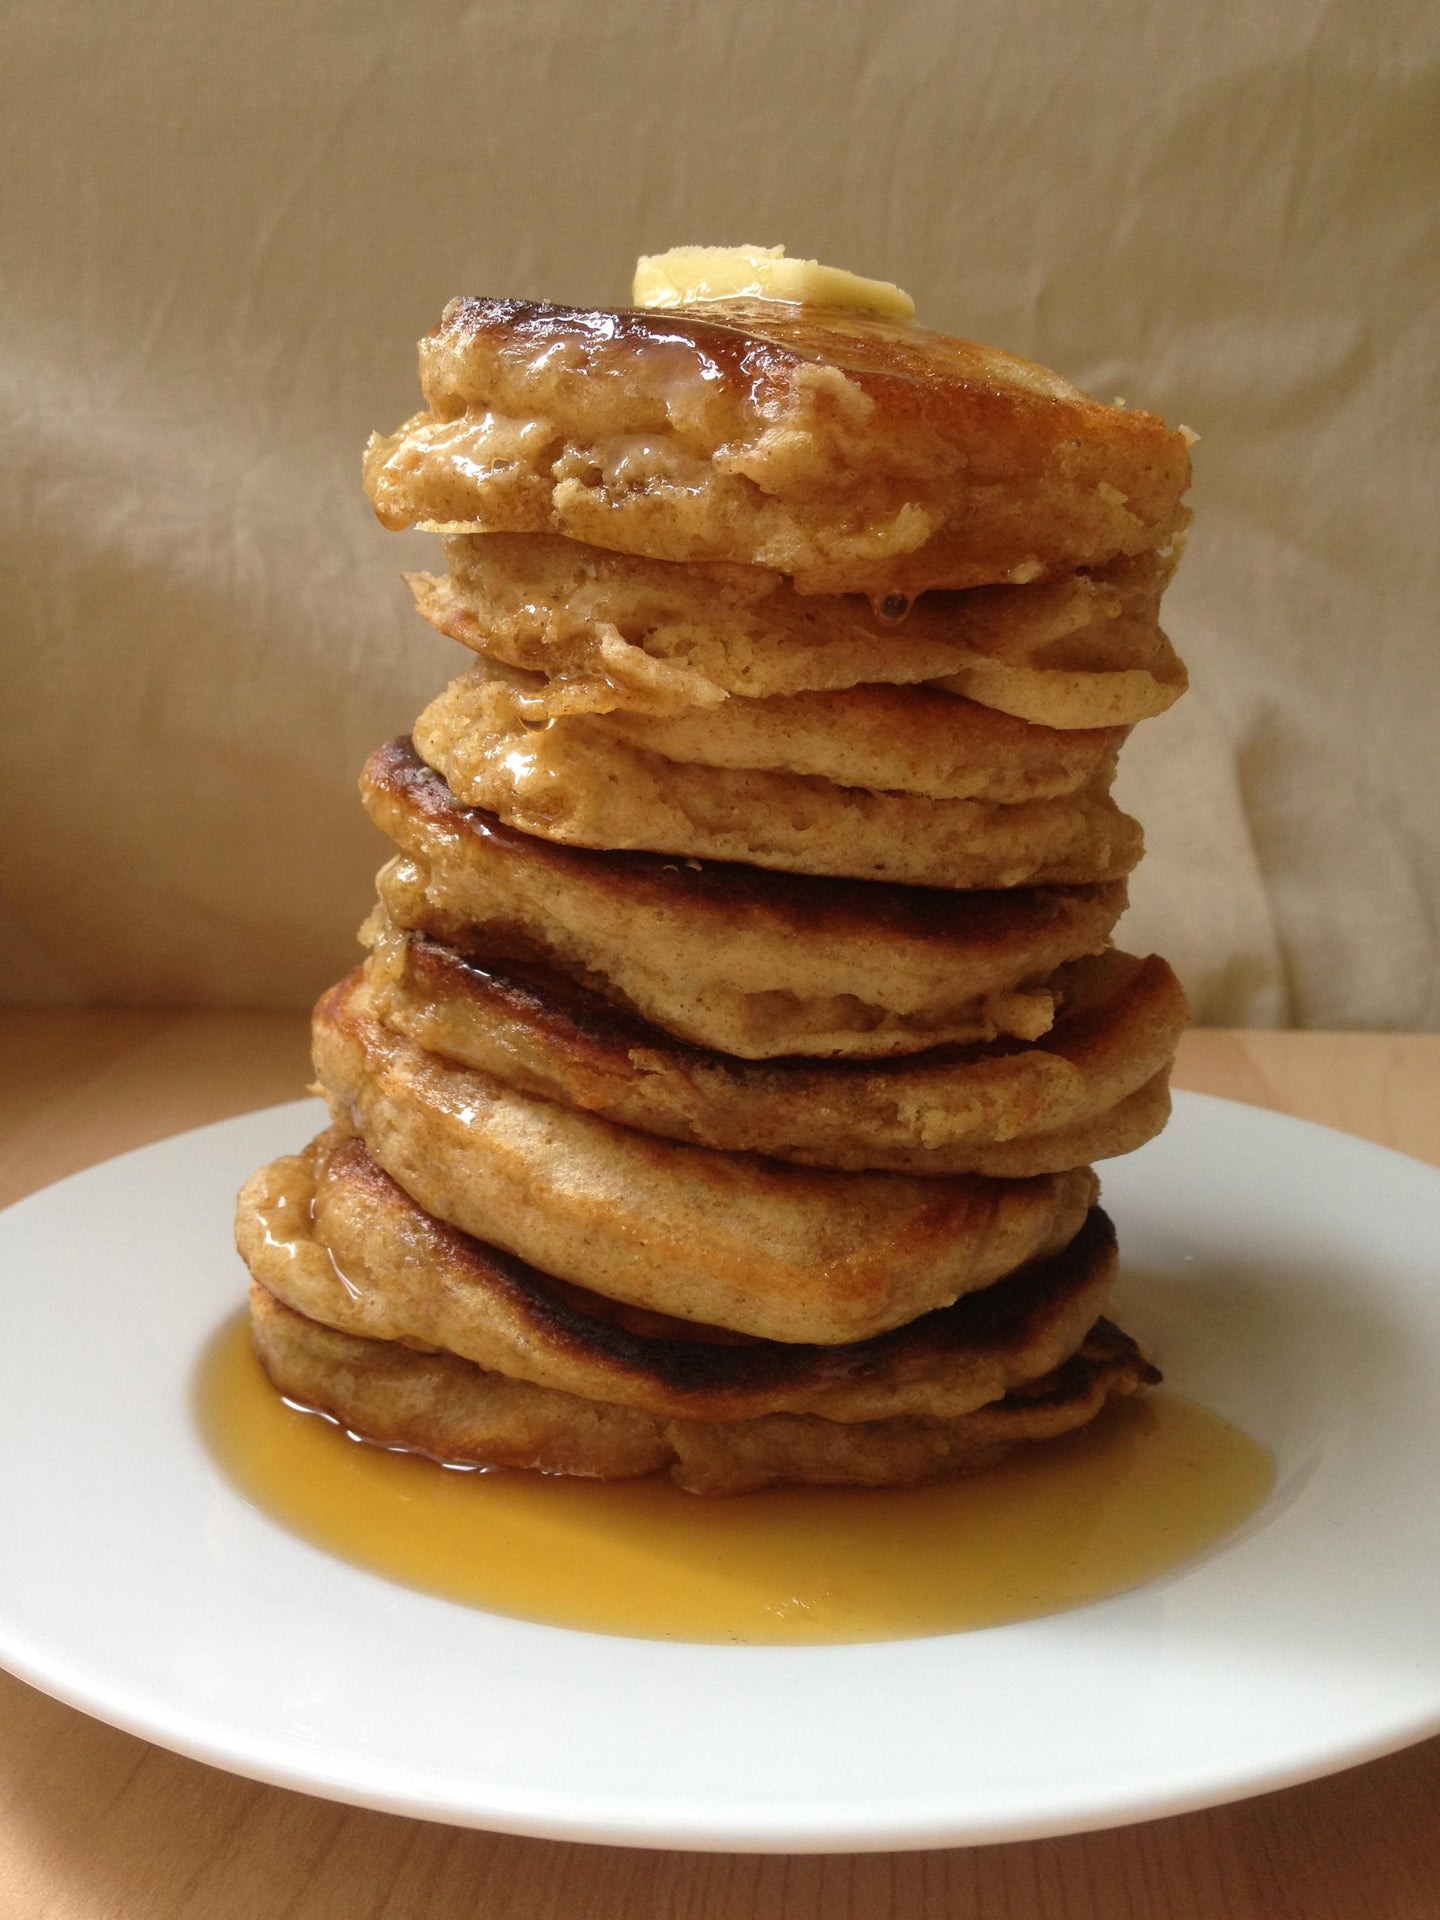 The best buttermilk pancake recipe in the world. Seriously.